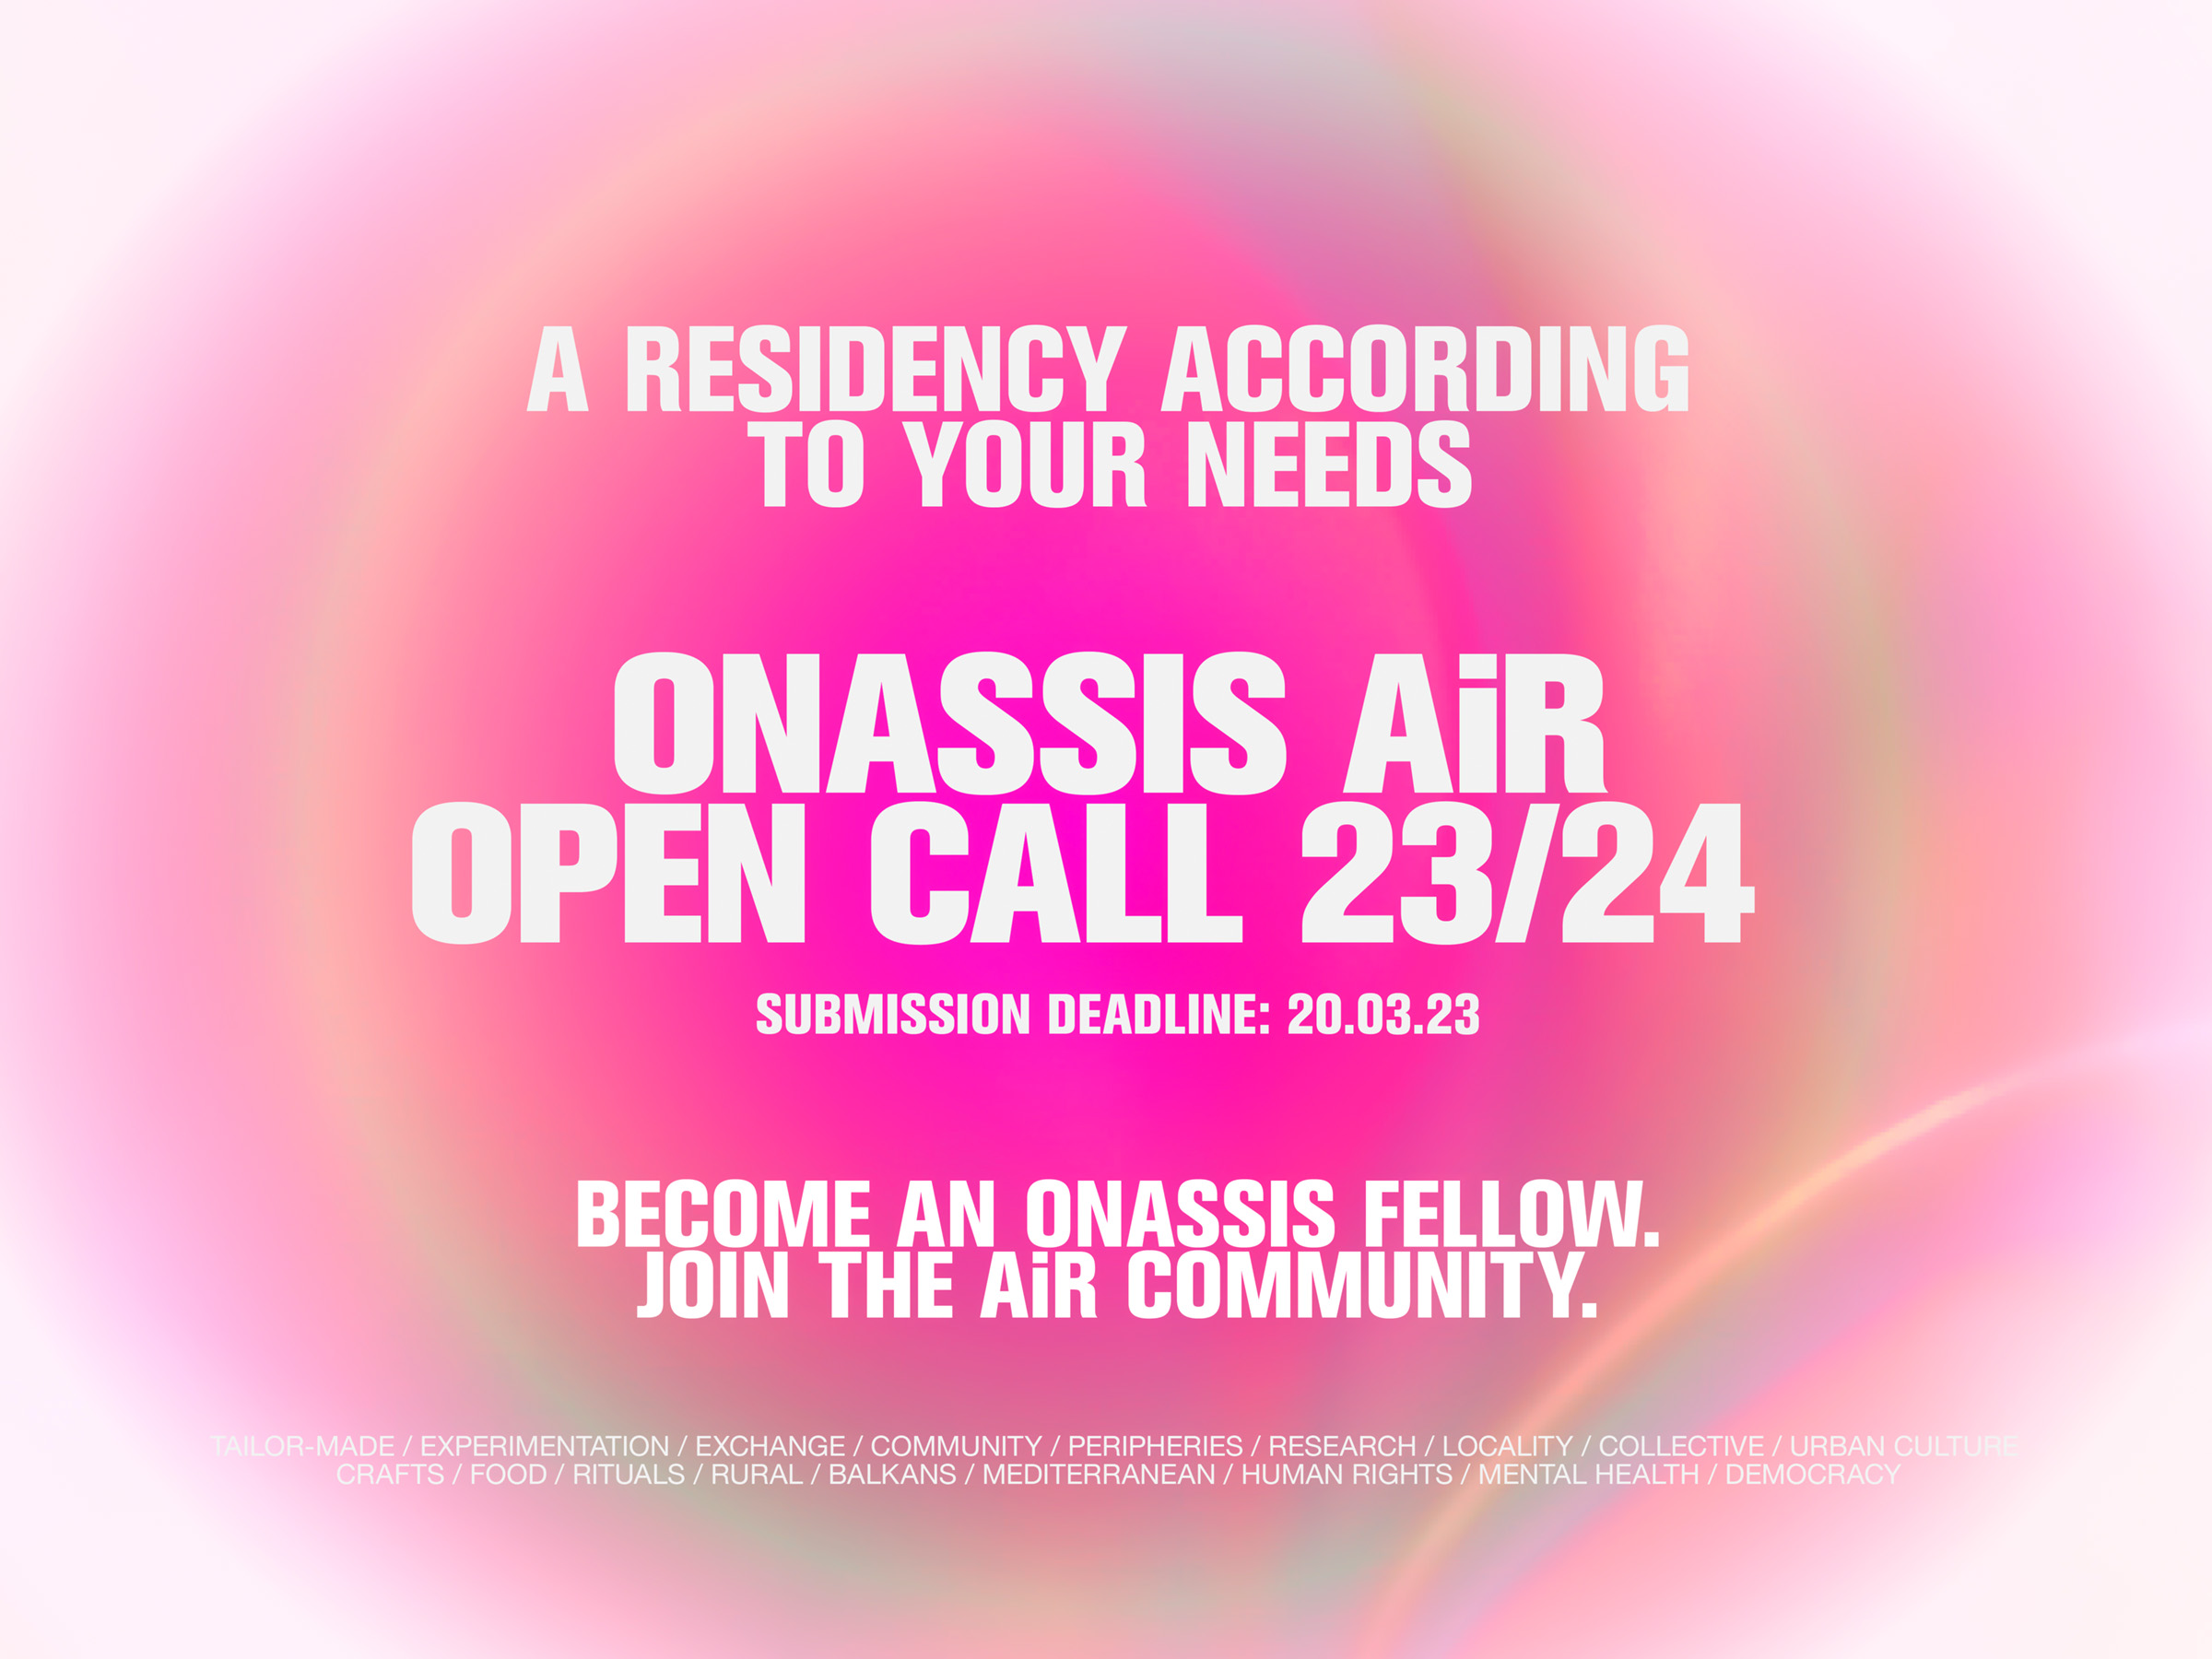 Onassis AiR Open Call 2023/24